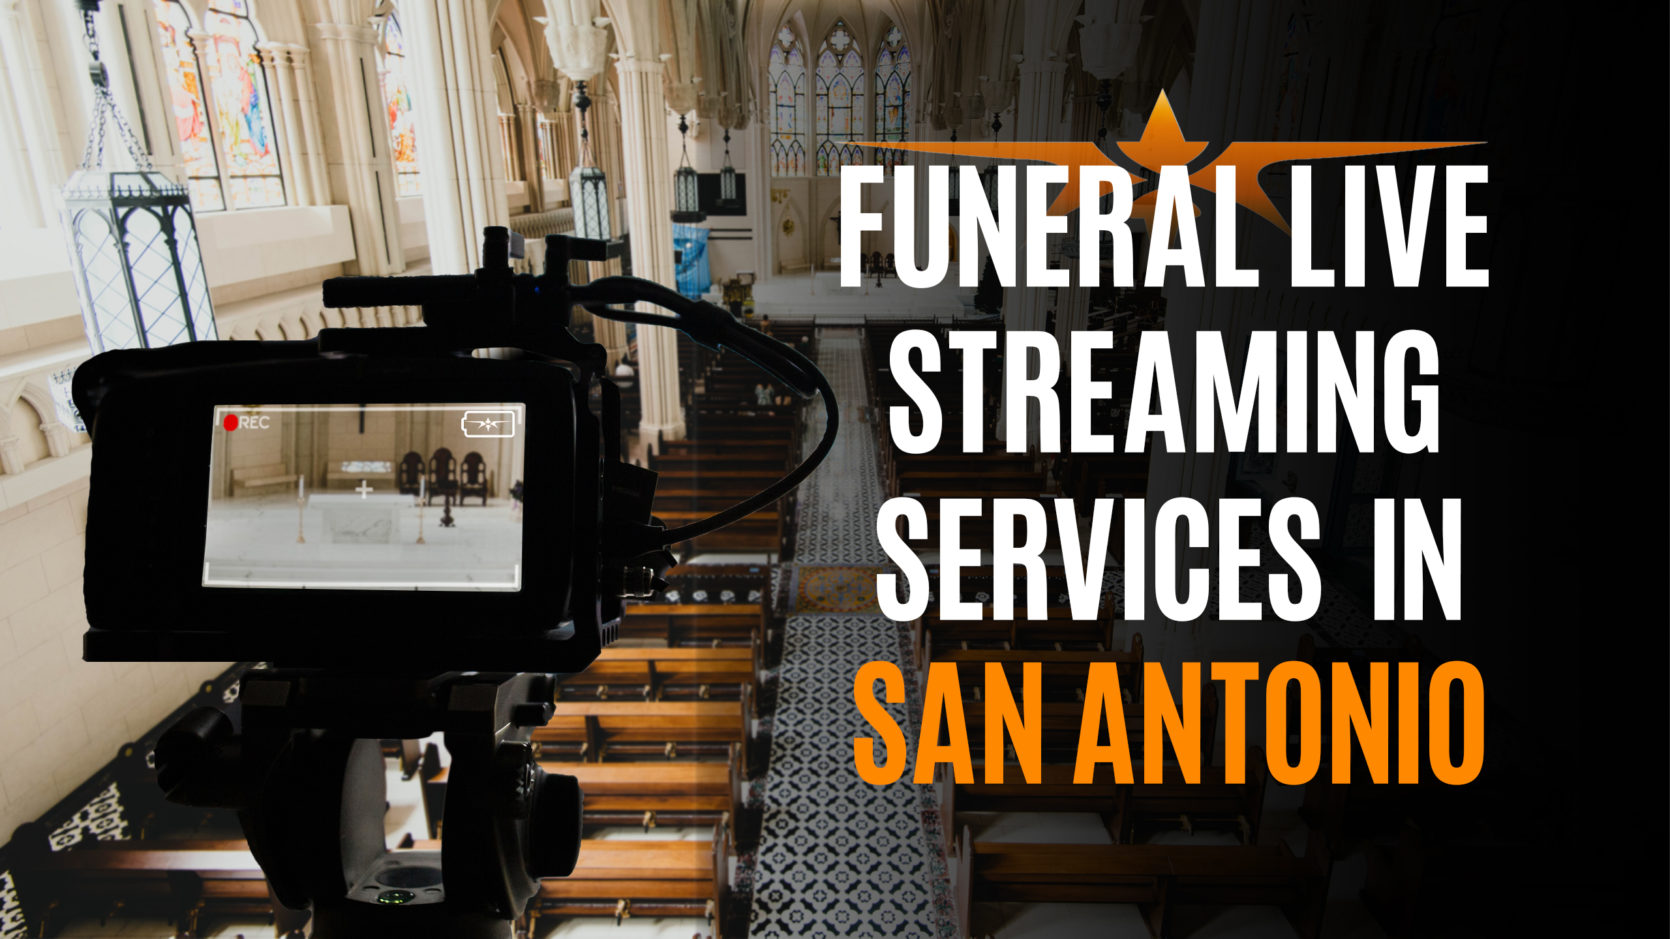 Funeral Live Streaming Services in San Antonio